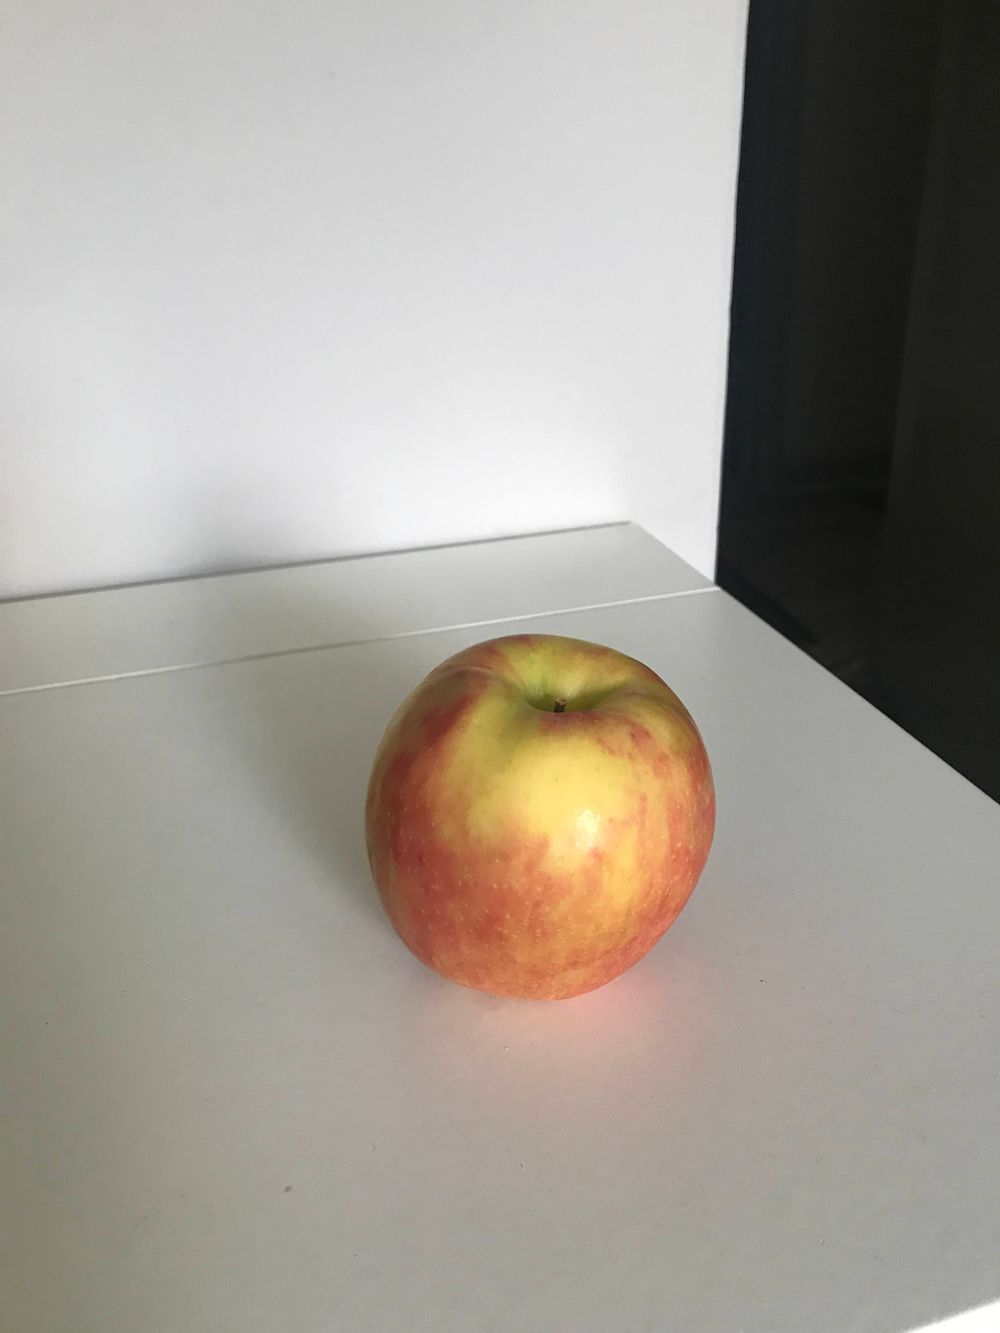 An apple against a white backdrop.